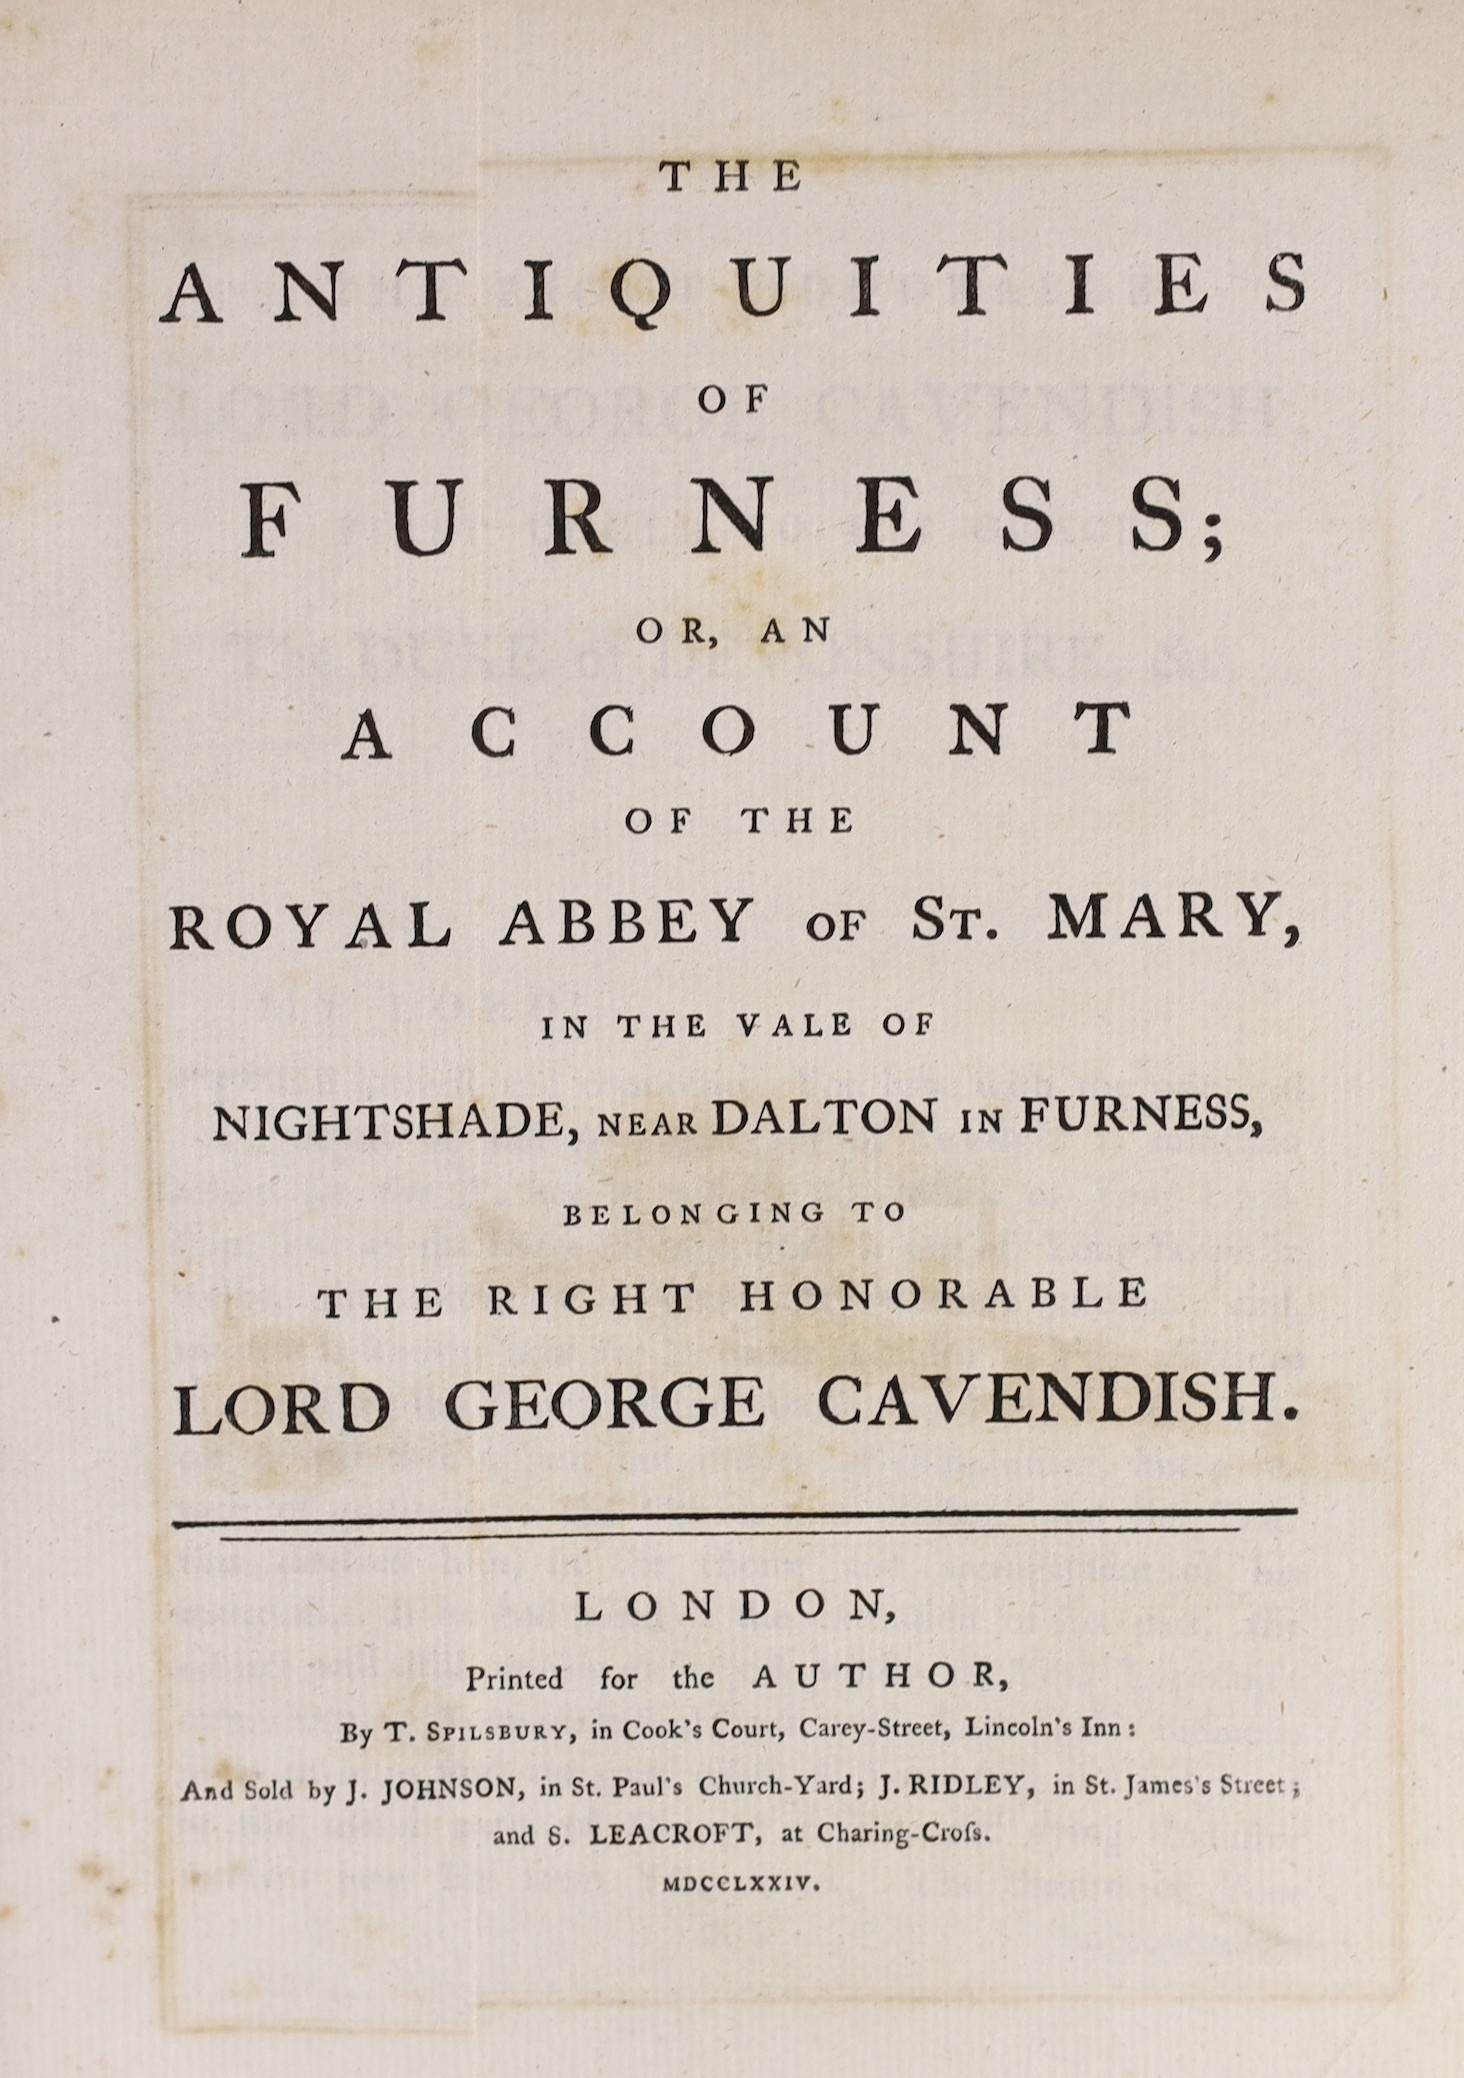 CUMBRIA: (West, Thomas) - The Antiquities of Furness; or an Account of the Royal Abbey of St. Mary, in the Vale of Nightshade.... folded map and plan and 2 other plates, subscribers list; contemp. diced calf, covers with